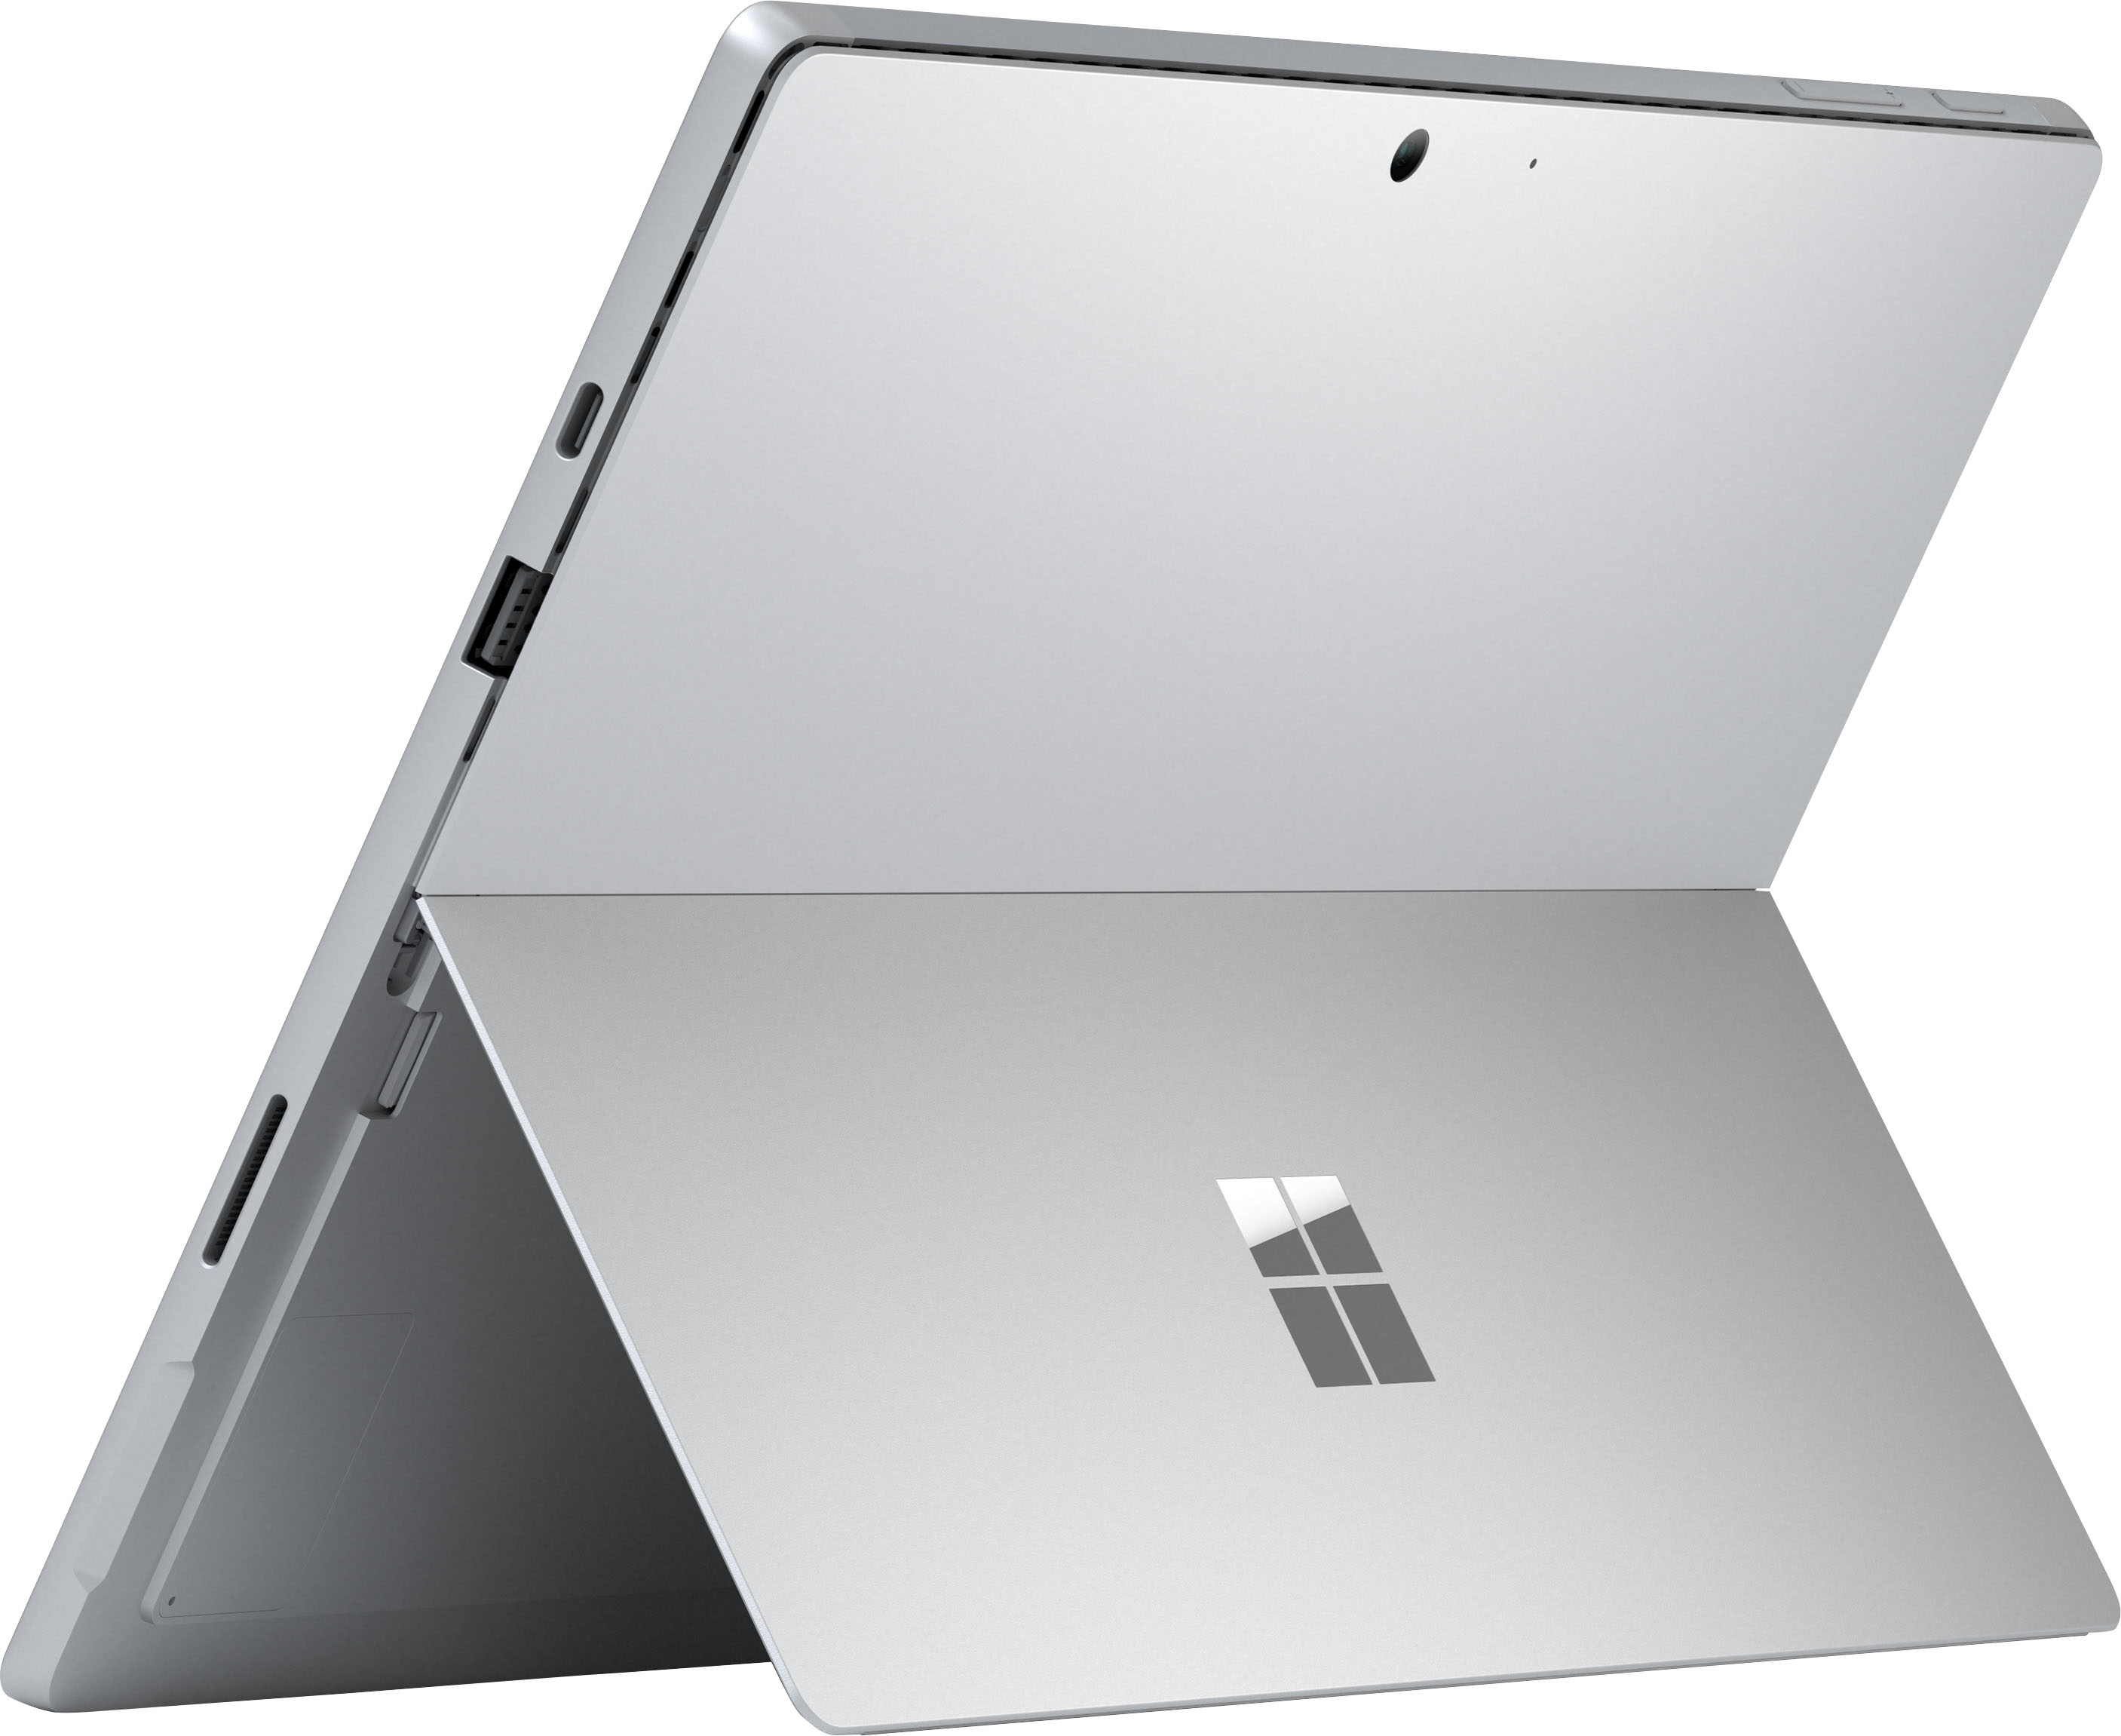 Microsoft - Surface Pro 7+ - 12.3” Touch Screen – Intel Core i3 – 8GB  Memory – 128GB SSD with Black Type Cover (Latest Model) - Platinum